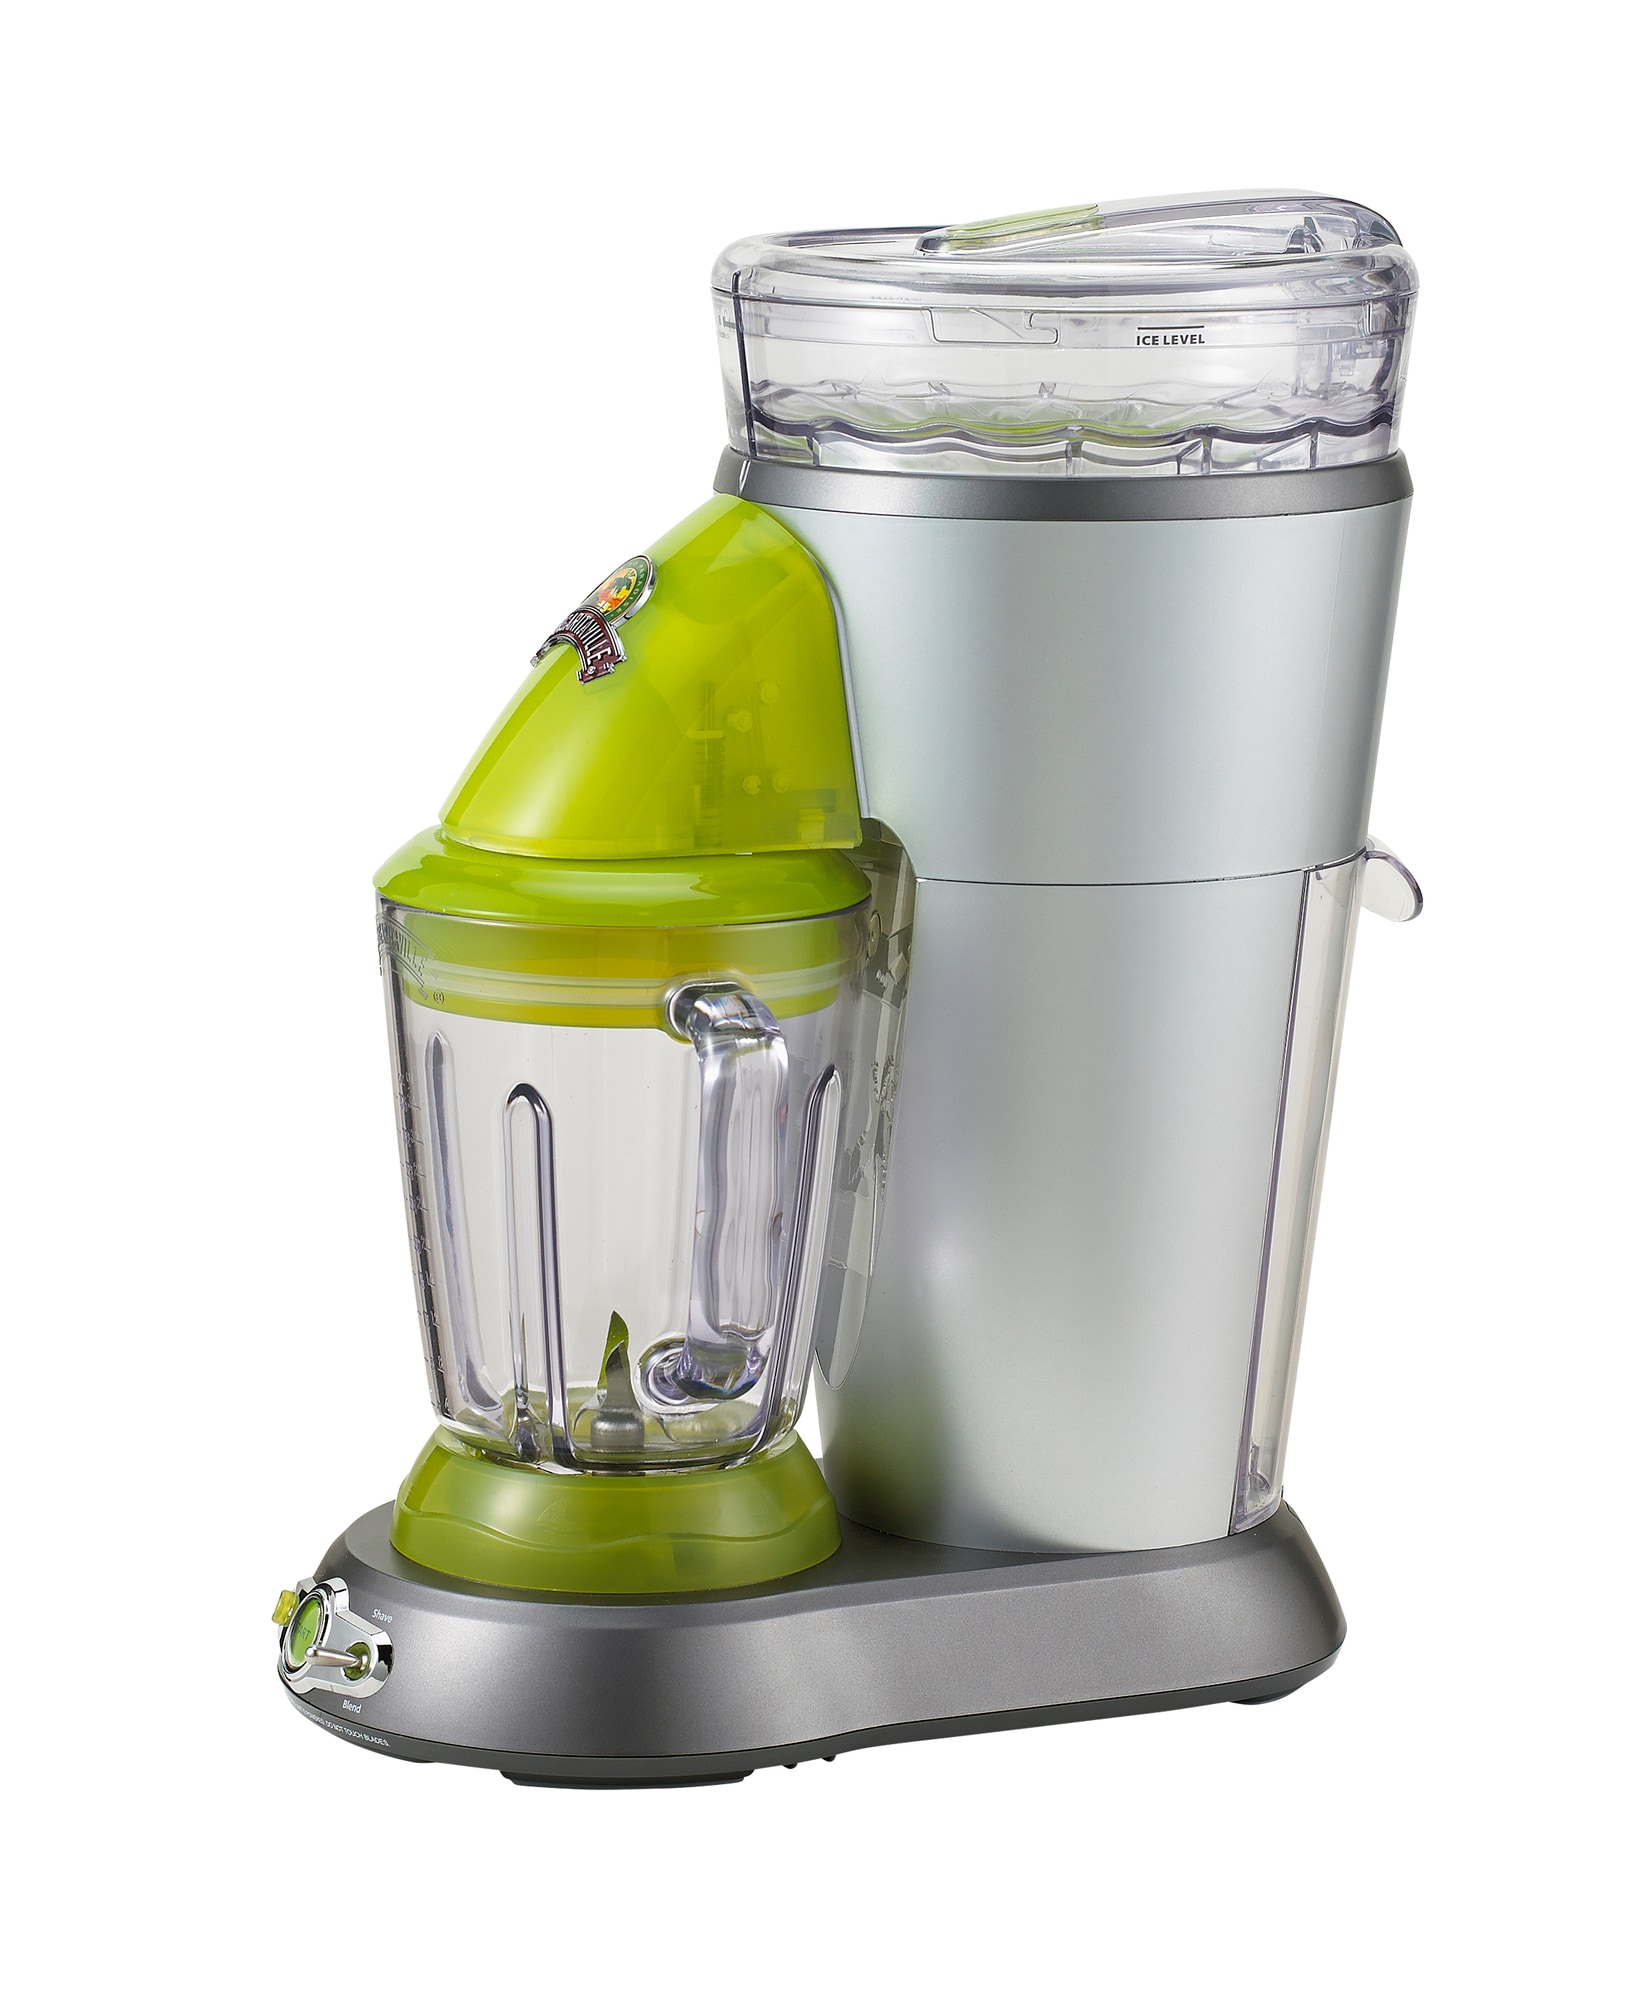 Great Frozen Drink Maker and Margarita Machine for Home - 32-Ounce